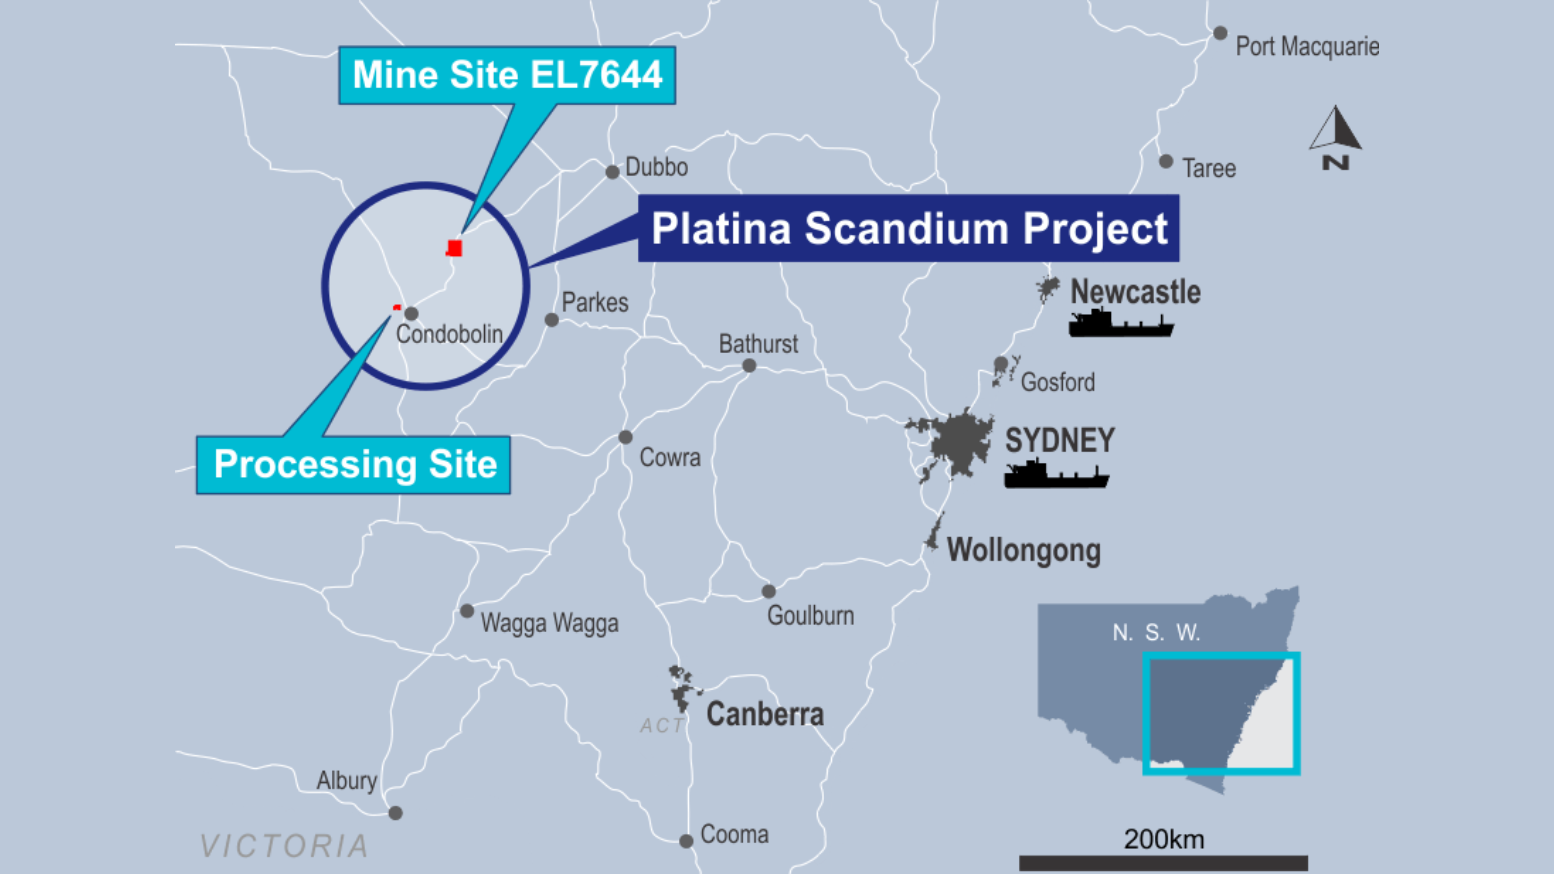 Rio Tinto has entered into a binding agreement to acquire the Platina Scandium Project, a high-grade scandium resource near Condobolin. The deal is worth $14 million, and the transaction is expected to be completed in the first half of 2023. The acquisition aligns with Rio Tinto’s strategic goal to grow in materials essential for the low-carbon transition. Image Credit: to www.platinaresources.com.au